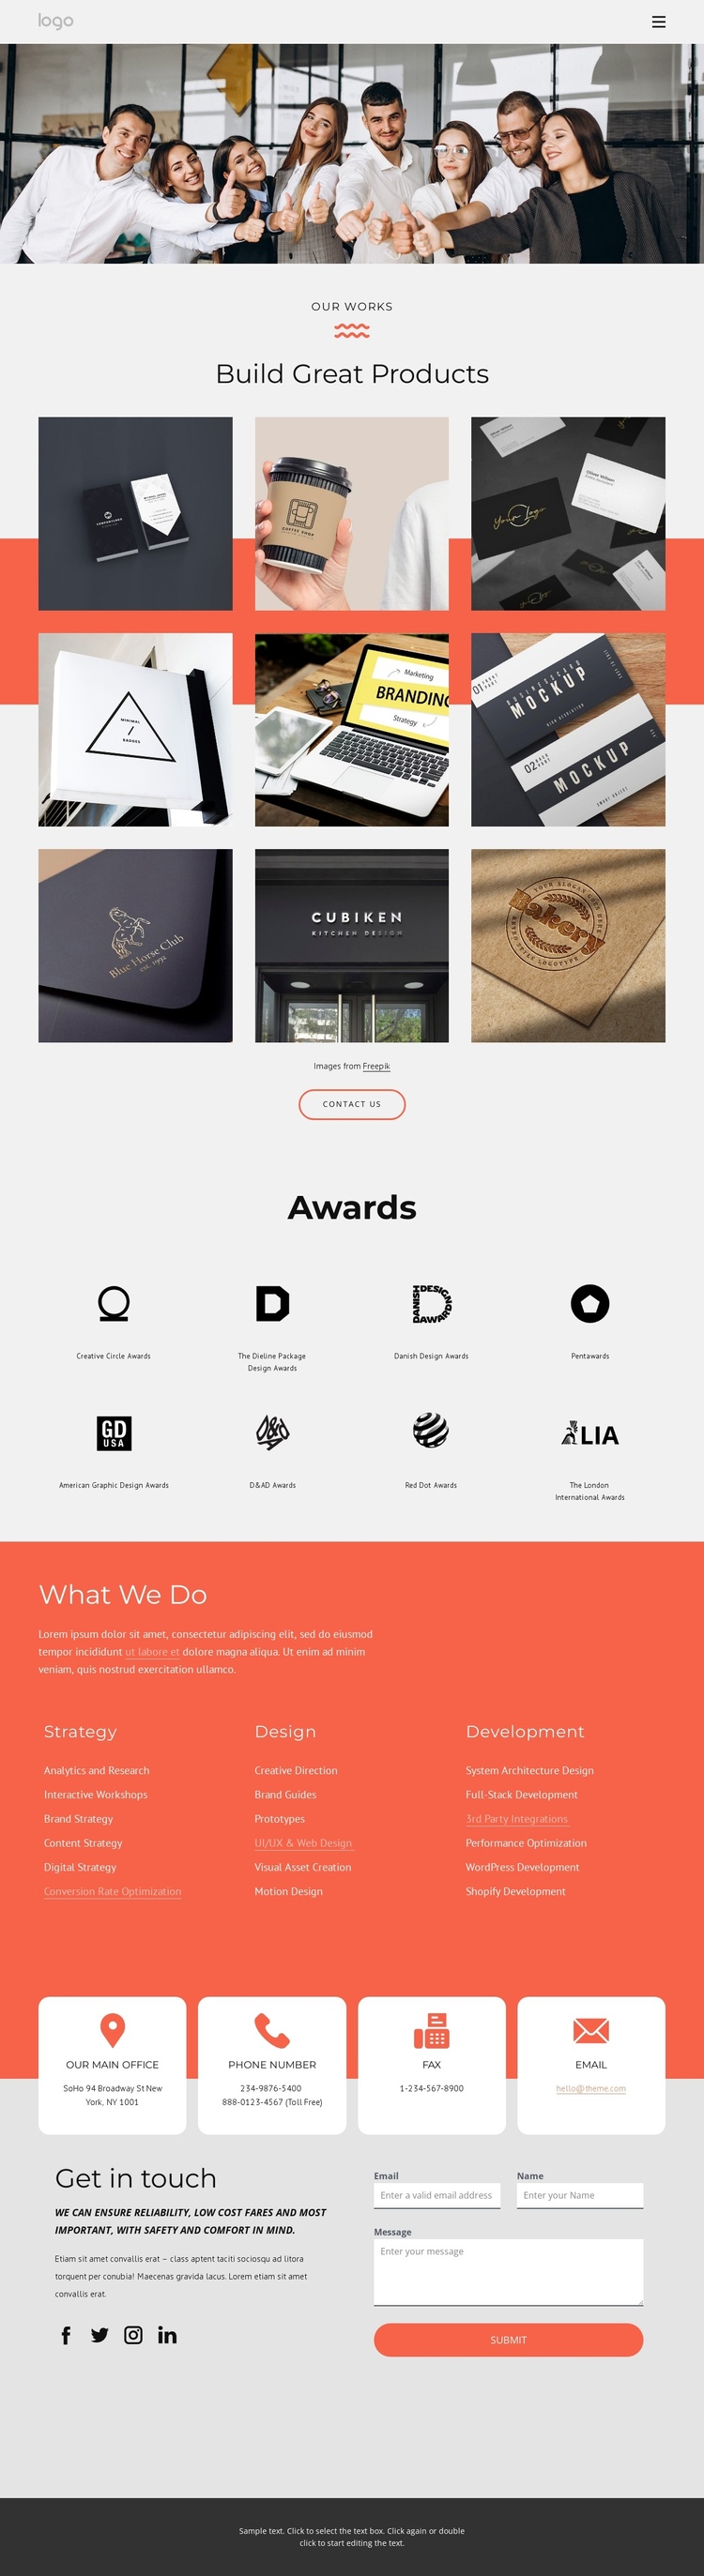 Award winning branding services One Page Template